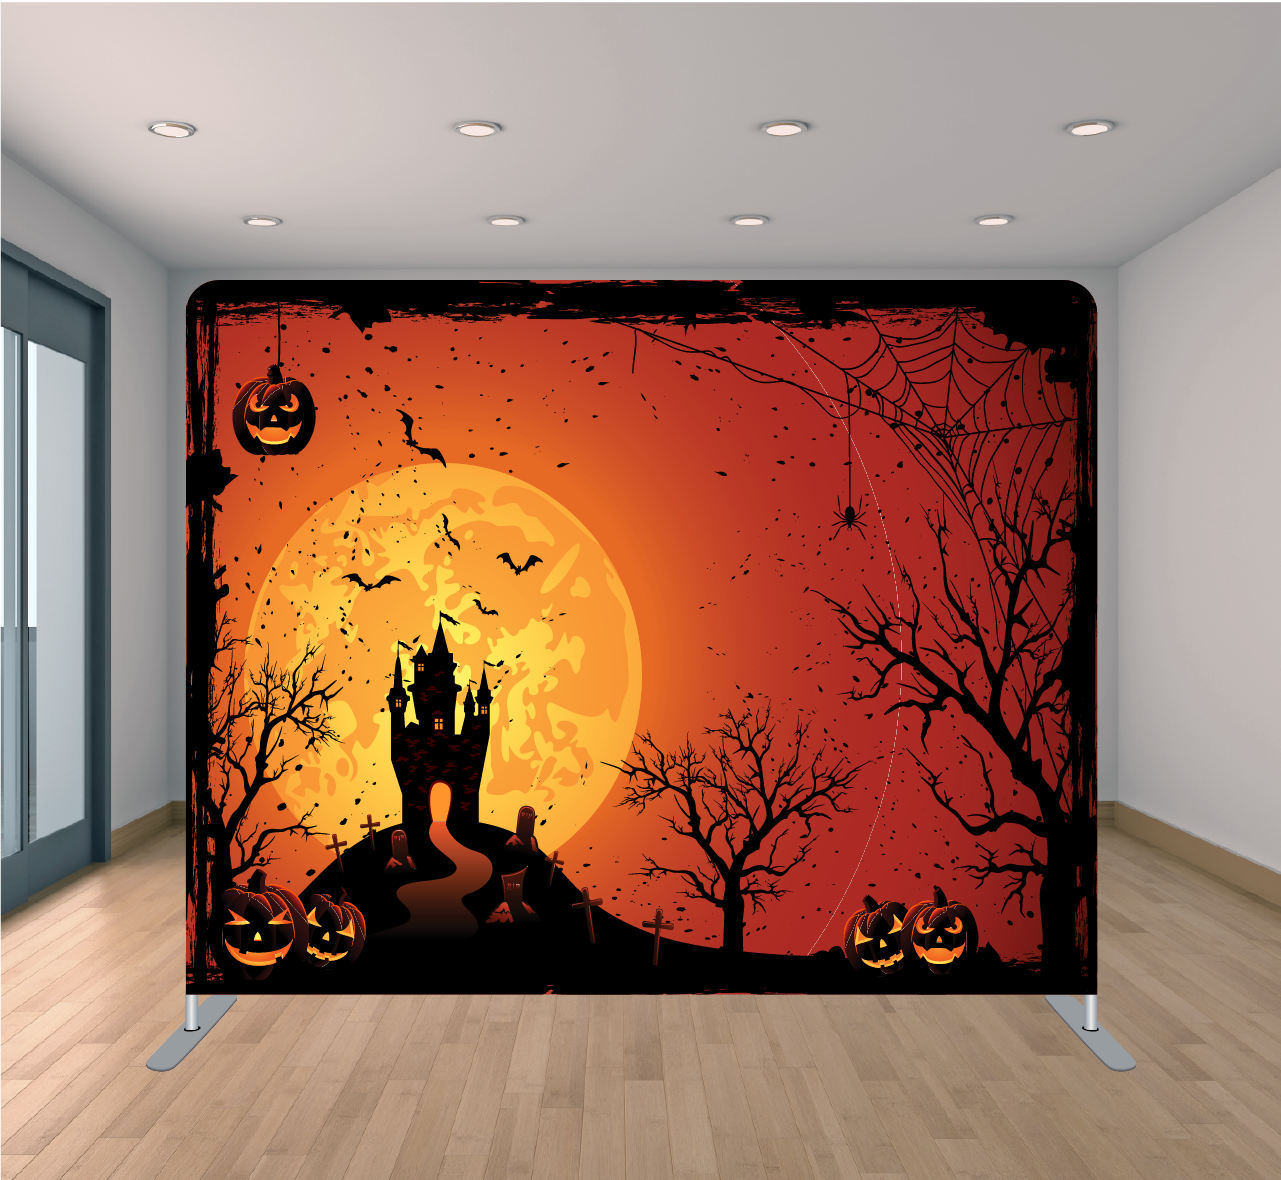 8x8ft Pillowcase Tension Backdrop- Haunted House 2